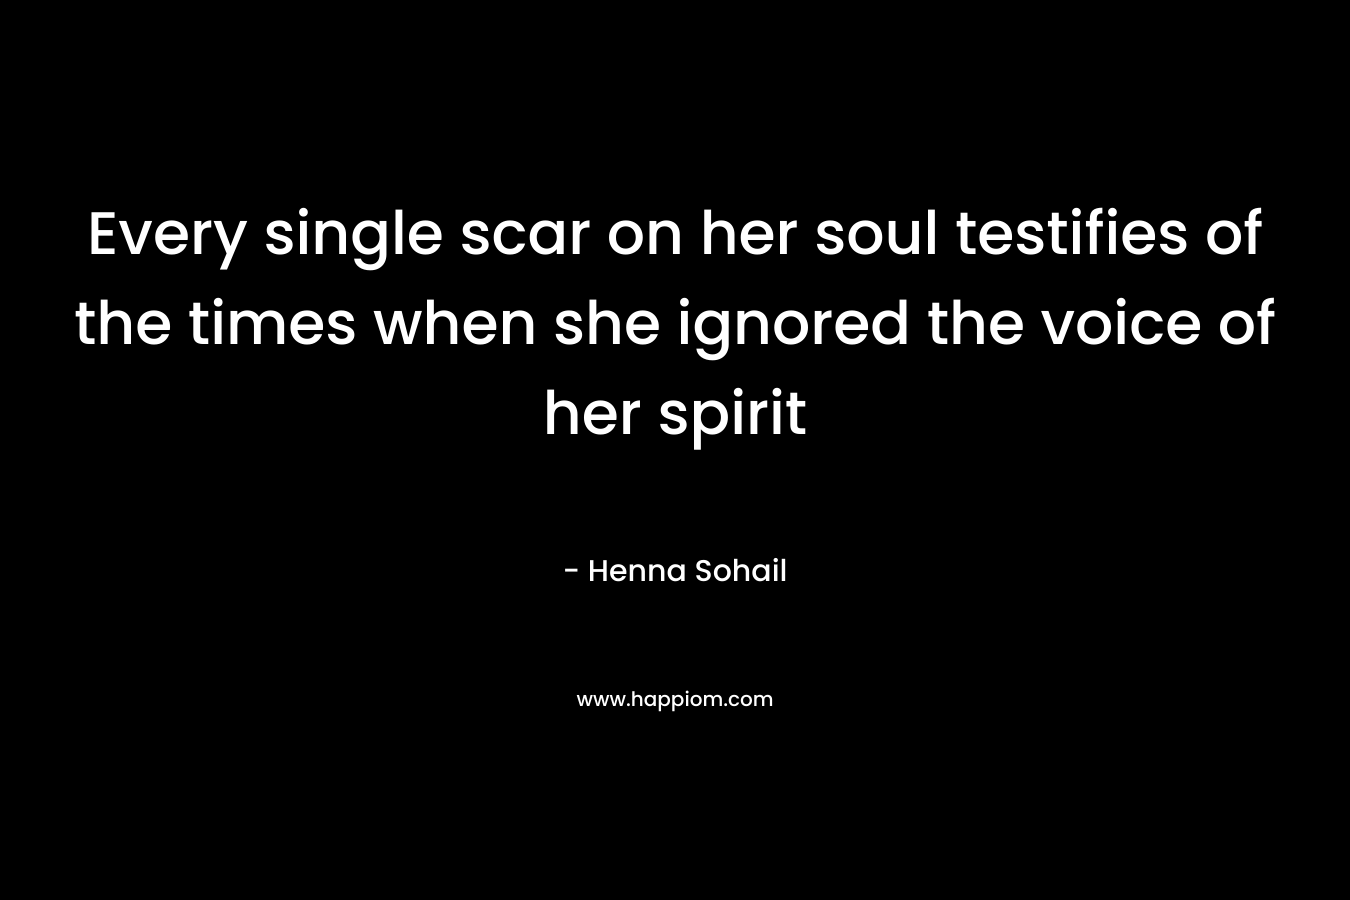 Every single scar on her soul testifies of the times when she ignored the voice of her spirit – Henna Sohail